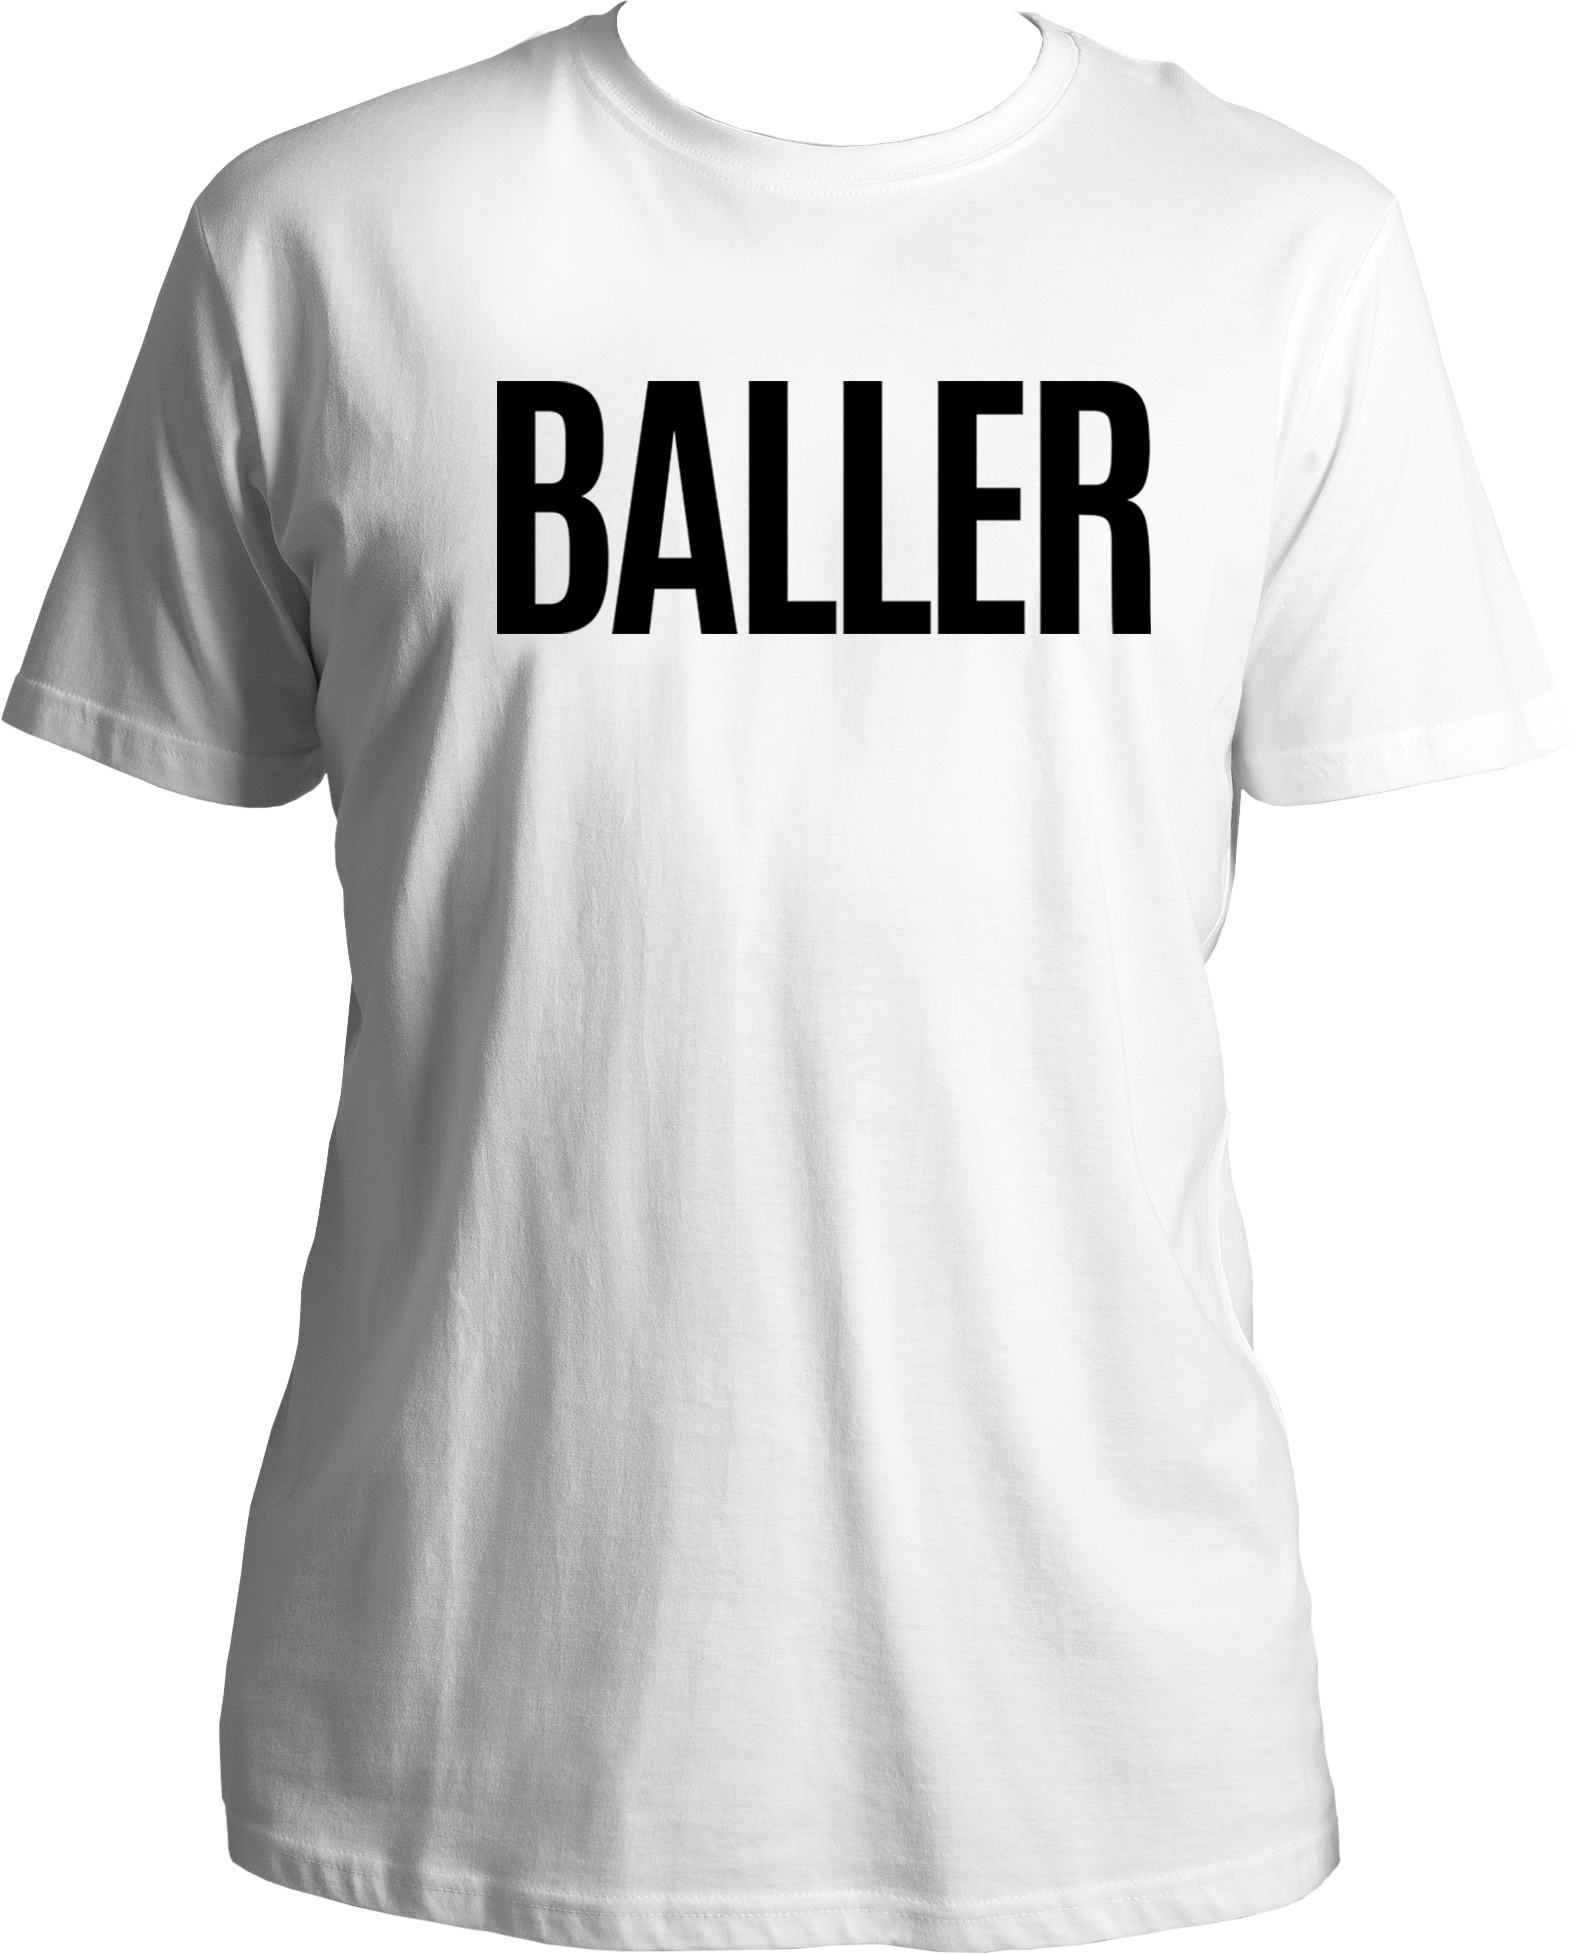 Introducing our exclusive Unisex "Baller" Round Neck Cotton T-Shirt – a fashion statement inspired by the swag and style of Shubh's Punjabi hit, "Baller." This isn't just a tee; it's a lifestyle, a celebration of confidence, and a nod to the high-energy vibes of the music scene.